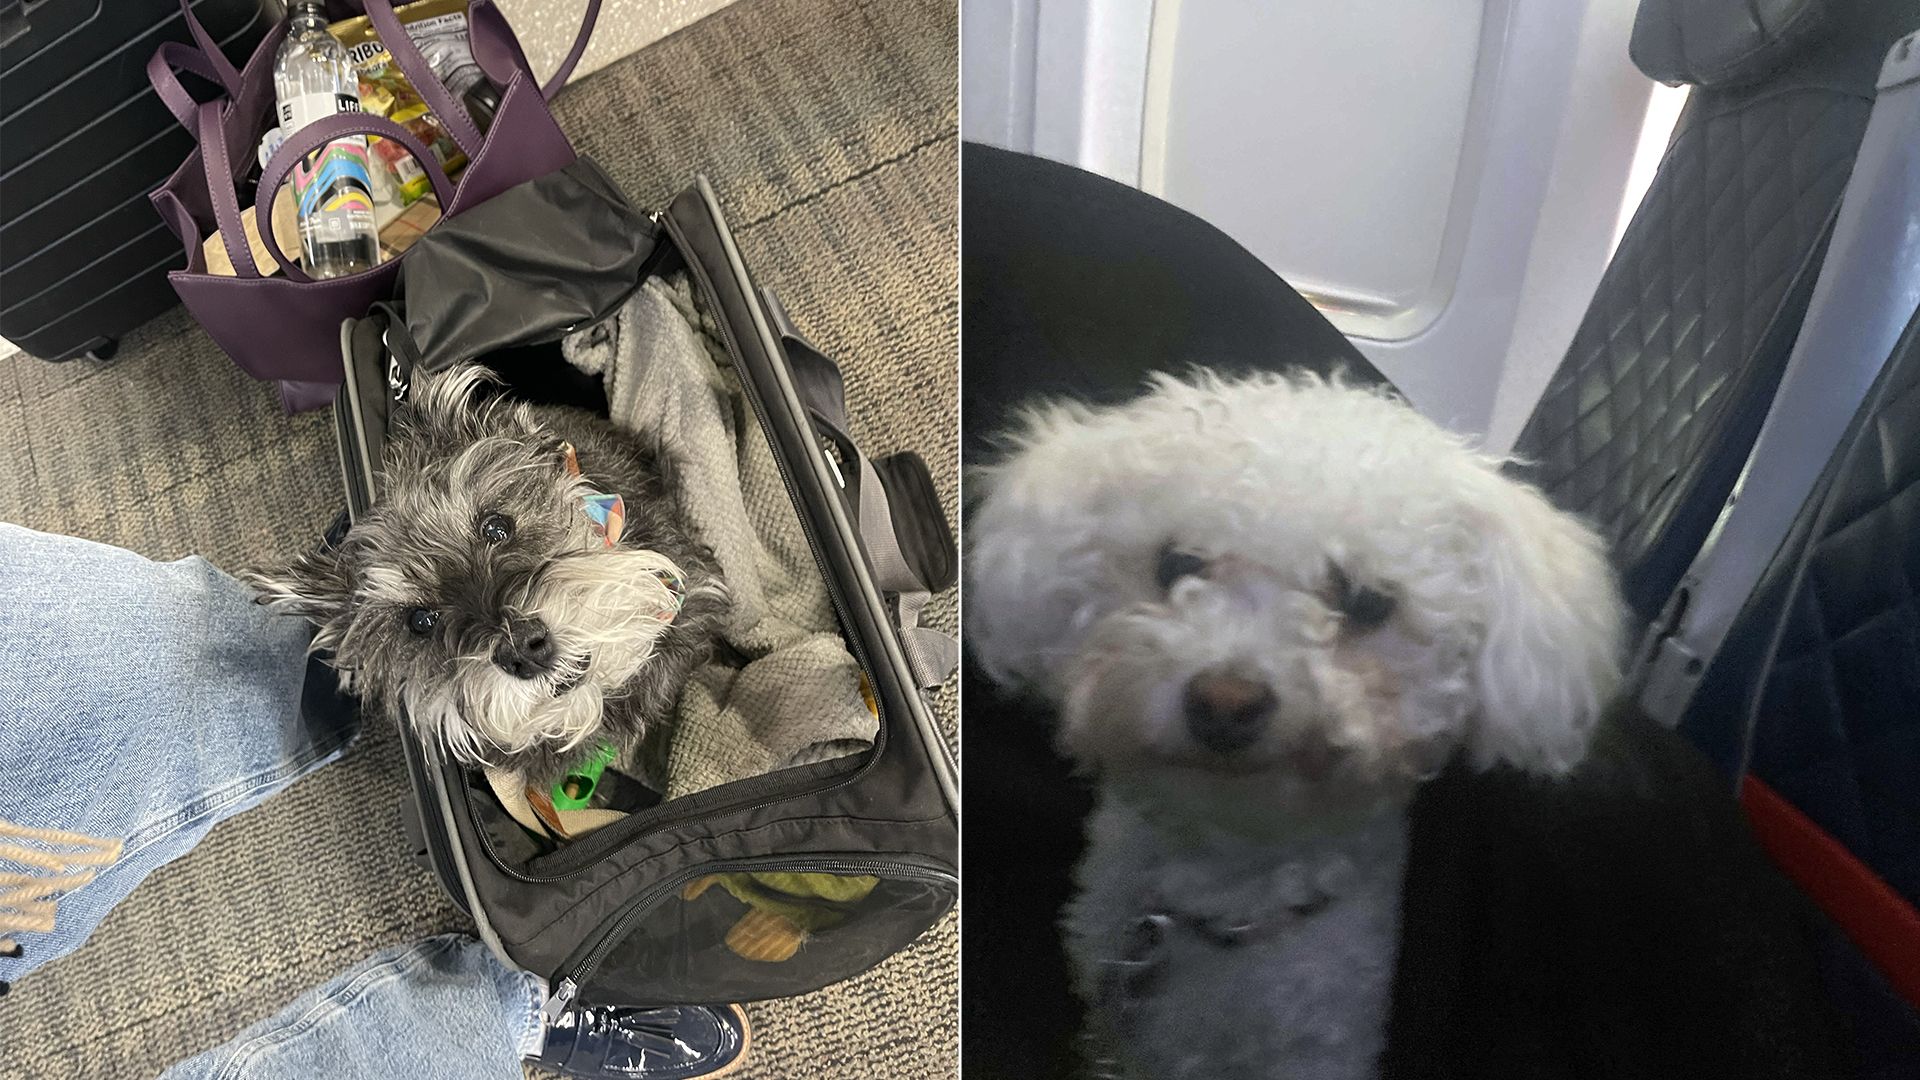 Side-by-side images of dogs getting ready to fly. On the left, is a schnauzer in his carrier on the floor. On the right, is a miniature white poodle sitting in an airplane seat, under a blanket. 